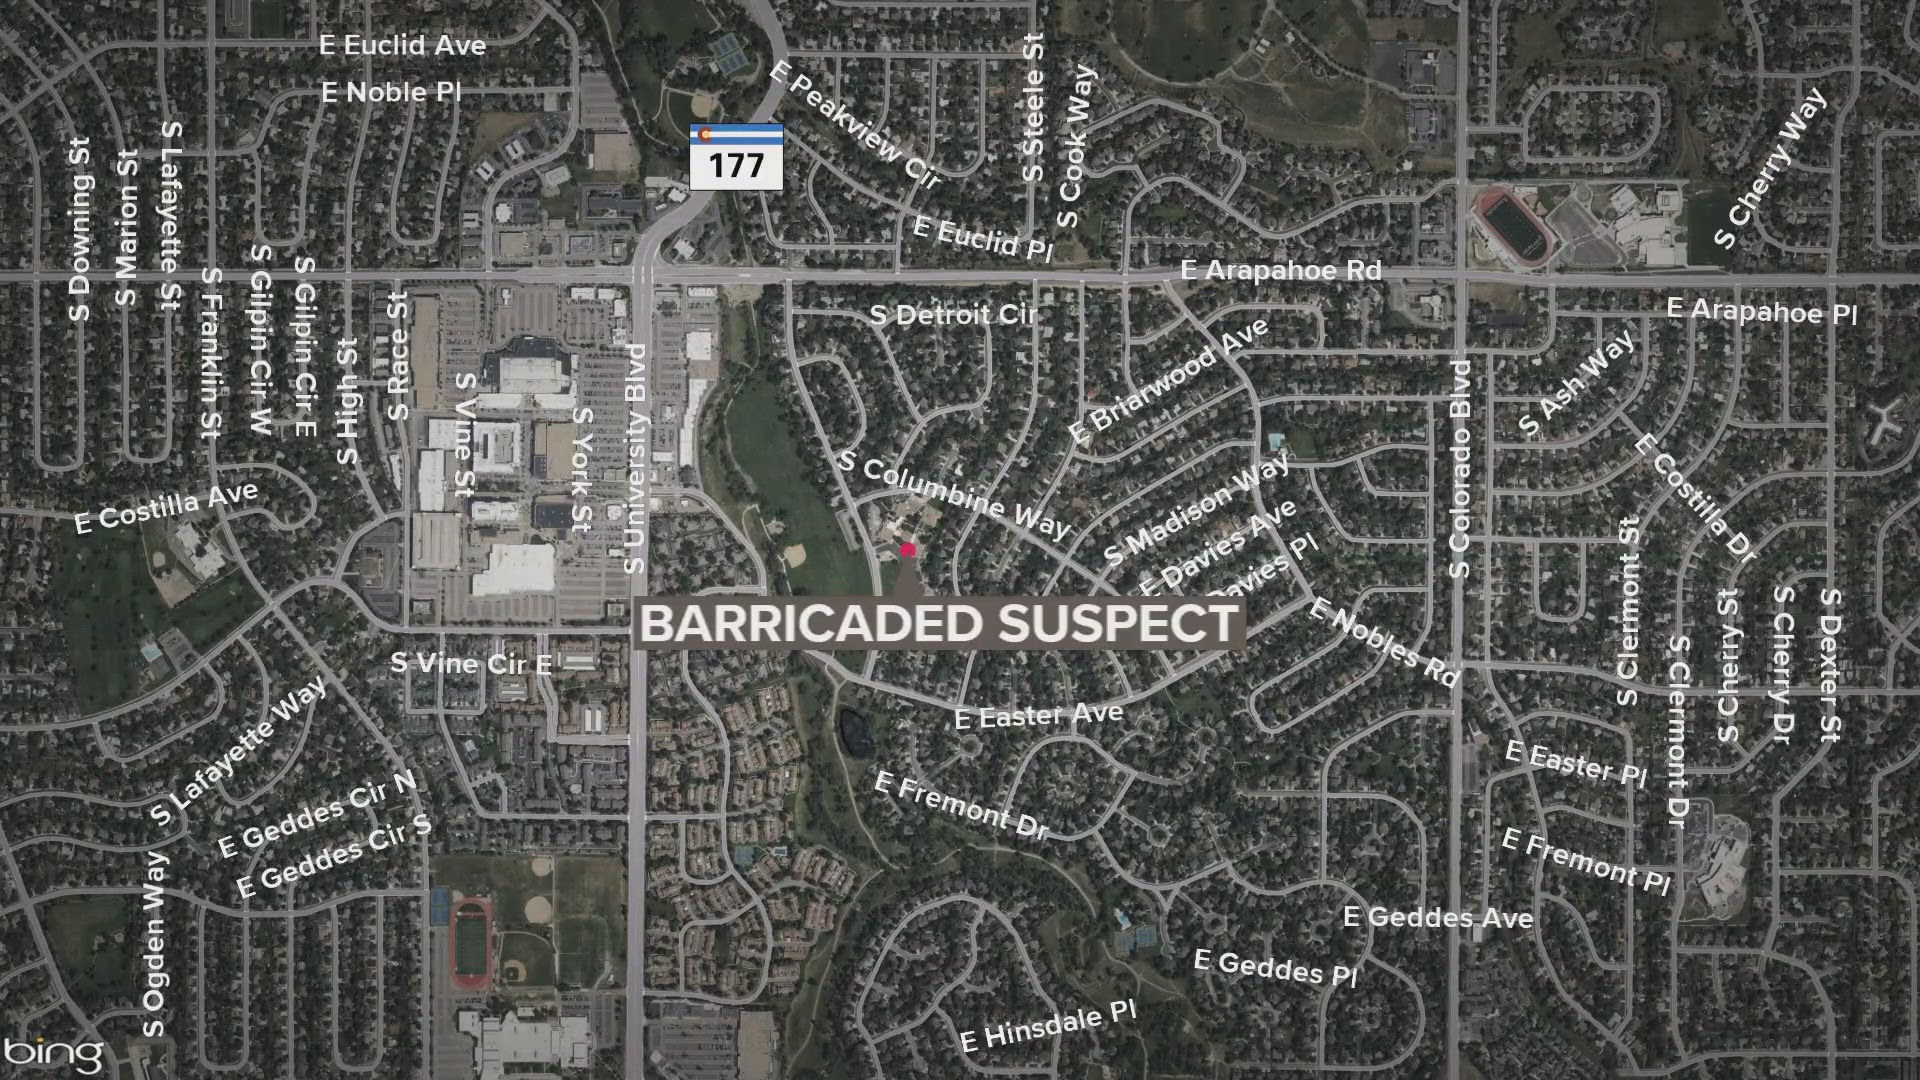 The man reportedly threatened another person with a shotgun before barricading himself in a camper at Cherry Knolls Park, the Arapahoe County Sheriff's Office said.